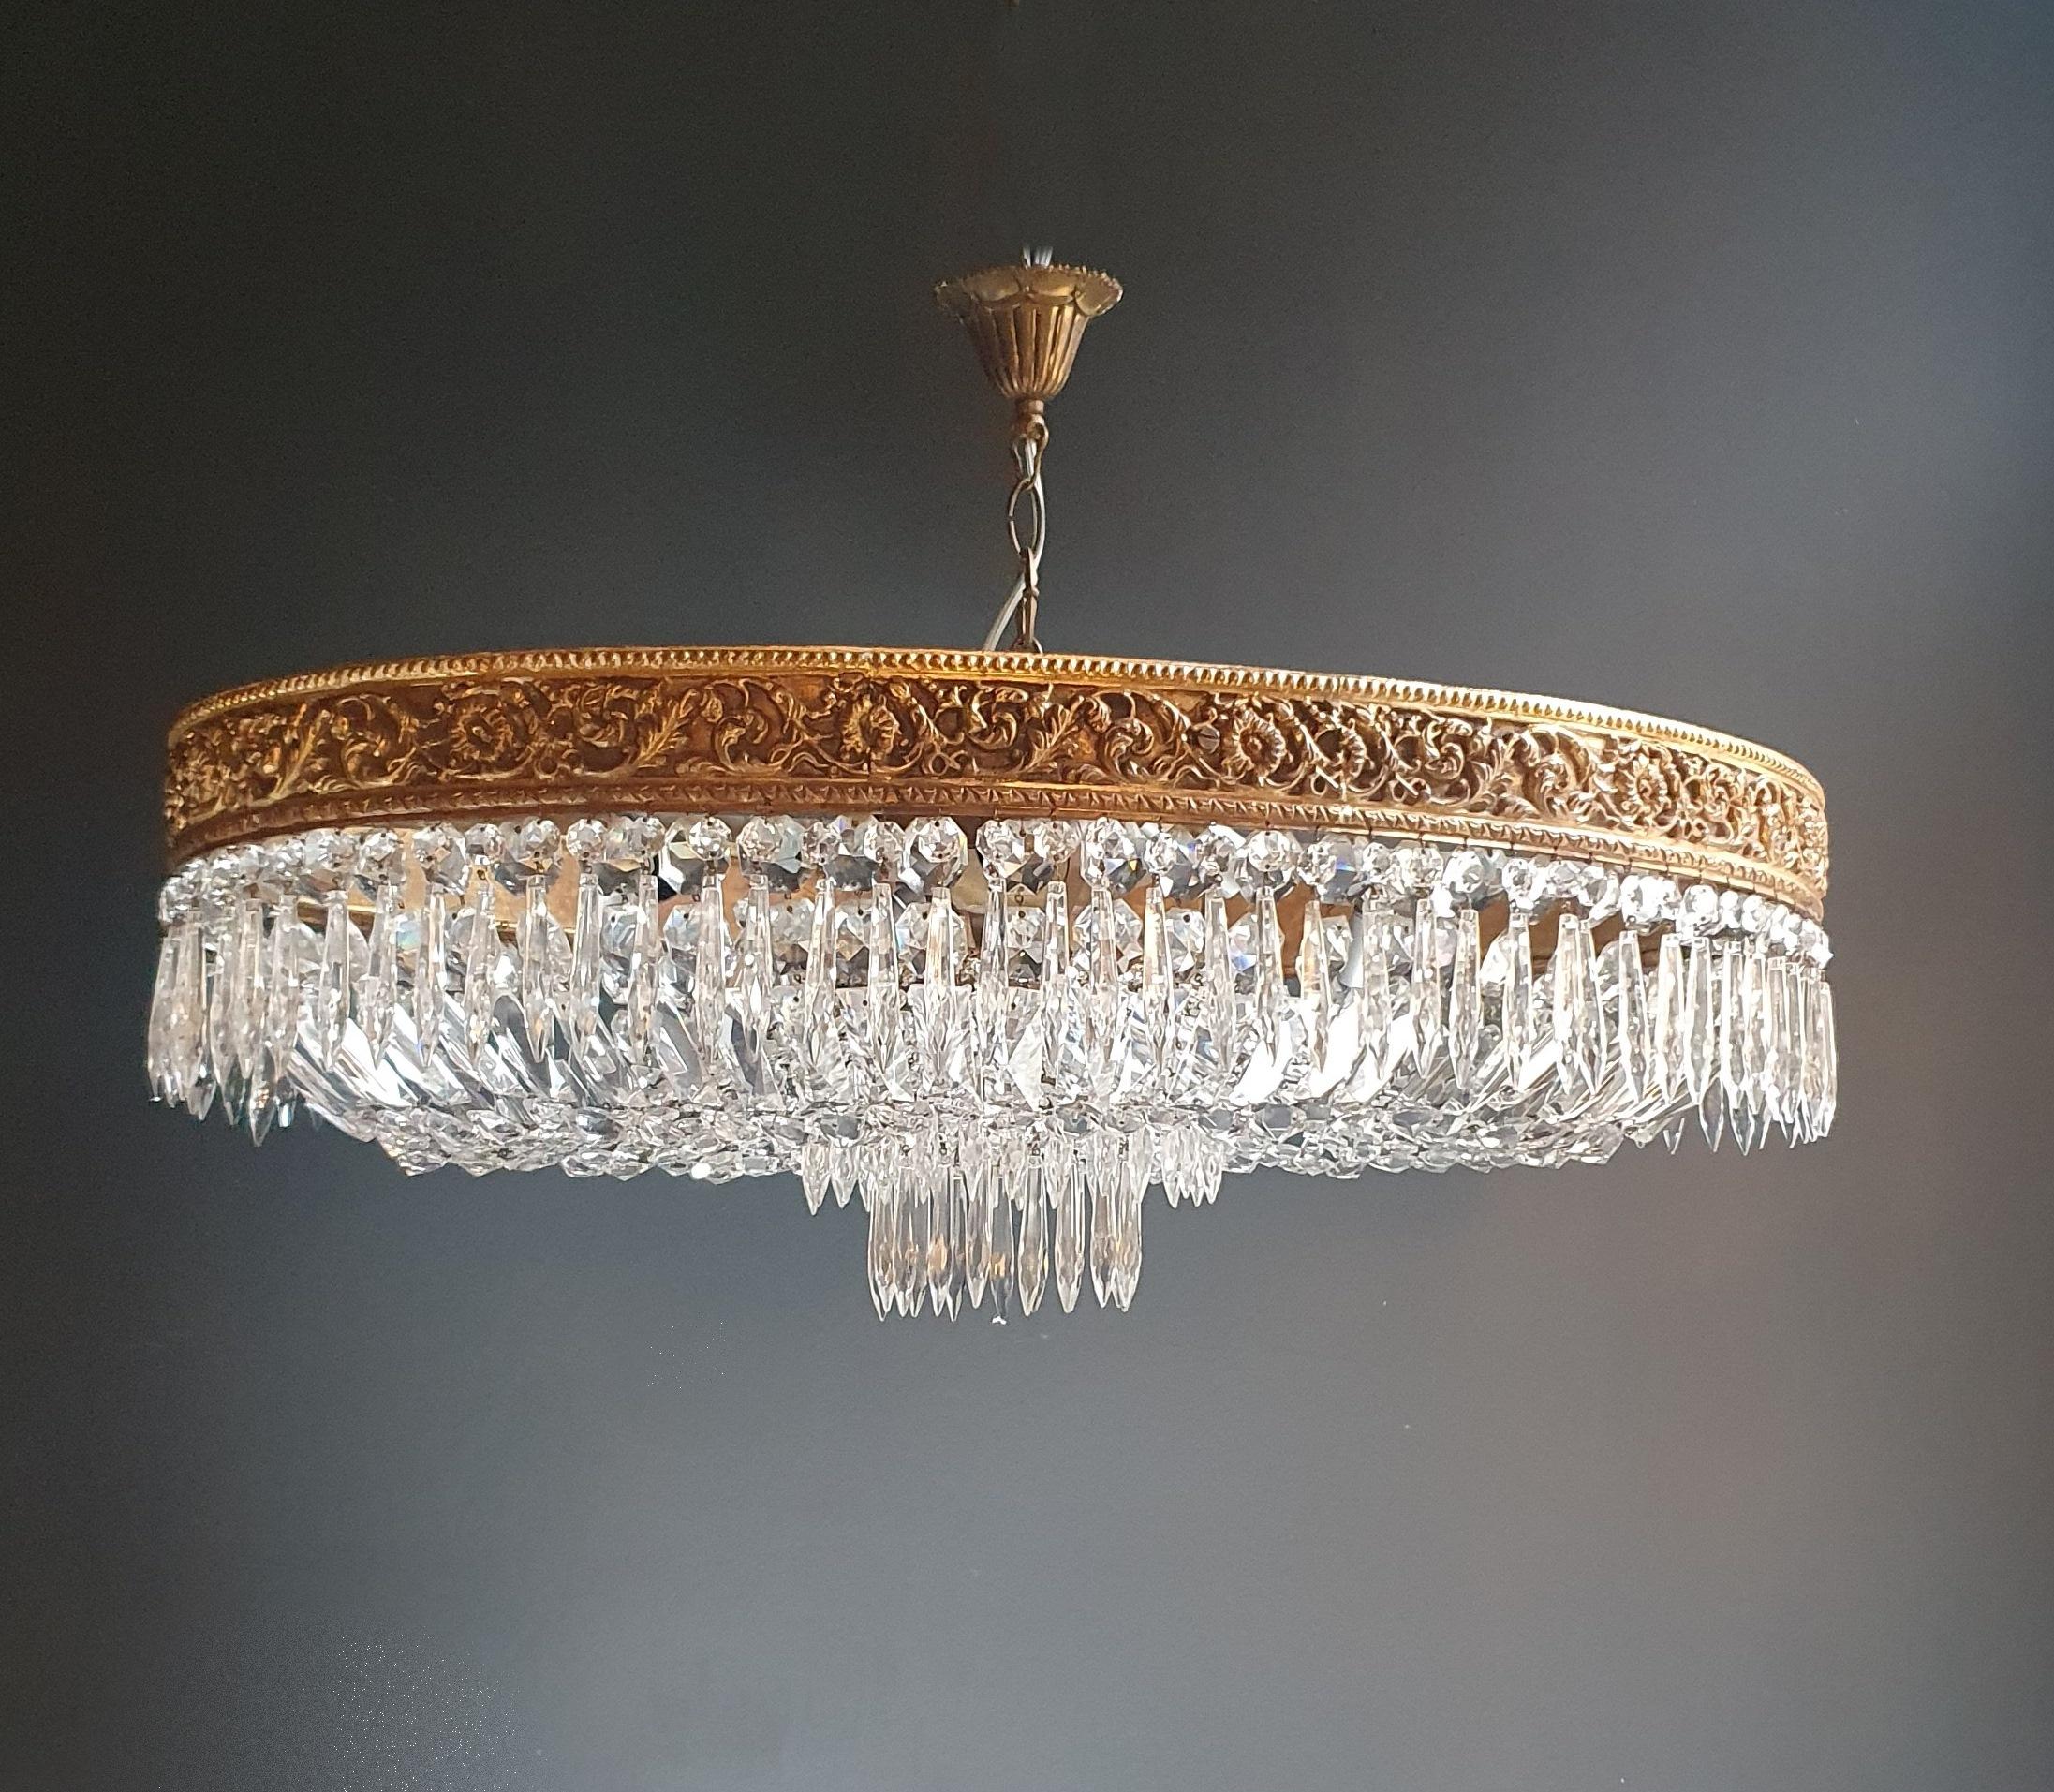 Low oval ceiling crystal chandelier brass.
Cabling completely renewed. Crystal hand knotted.
Measures: Total height 50 cm, height without chain 27 cm, diameter 80 x 52 cm. weight (approximately) 13kg.

Number of lights: 8-light bulb sockets: